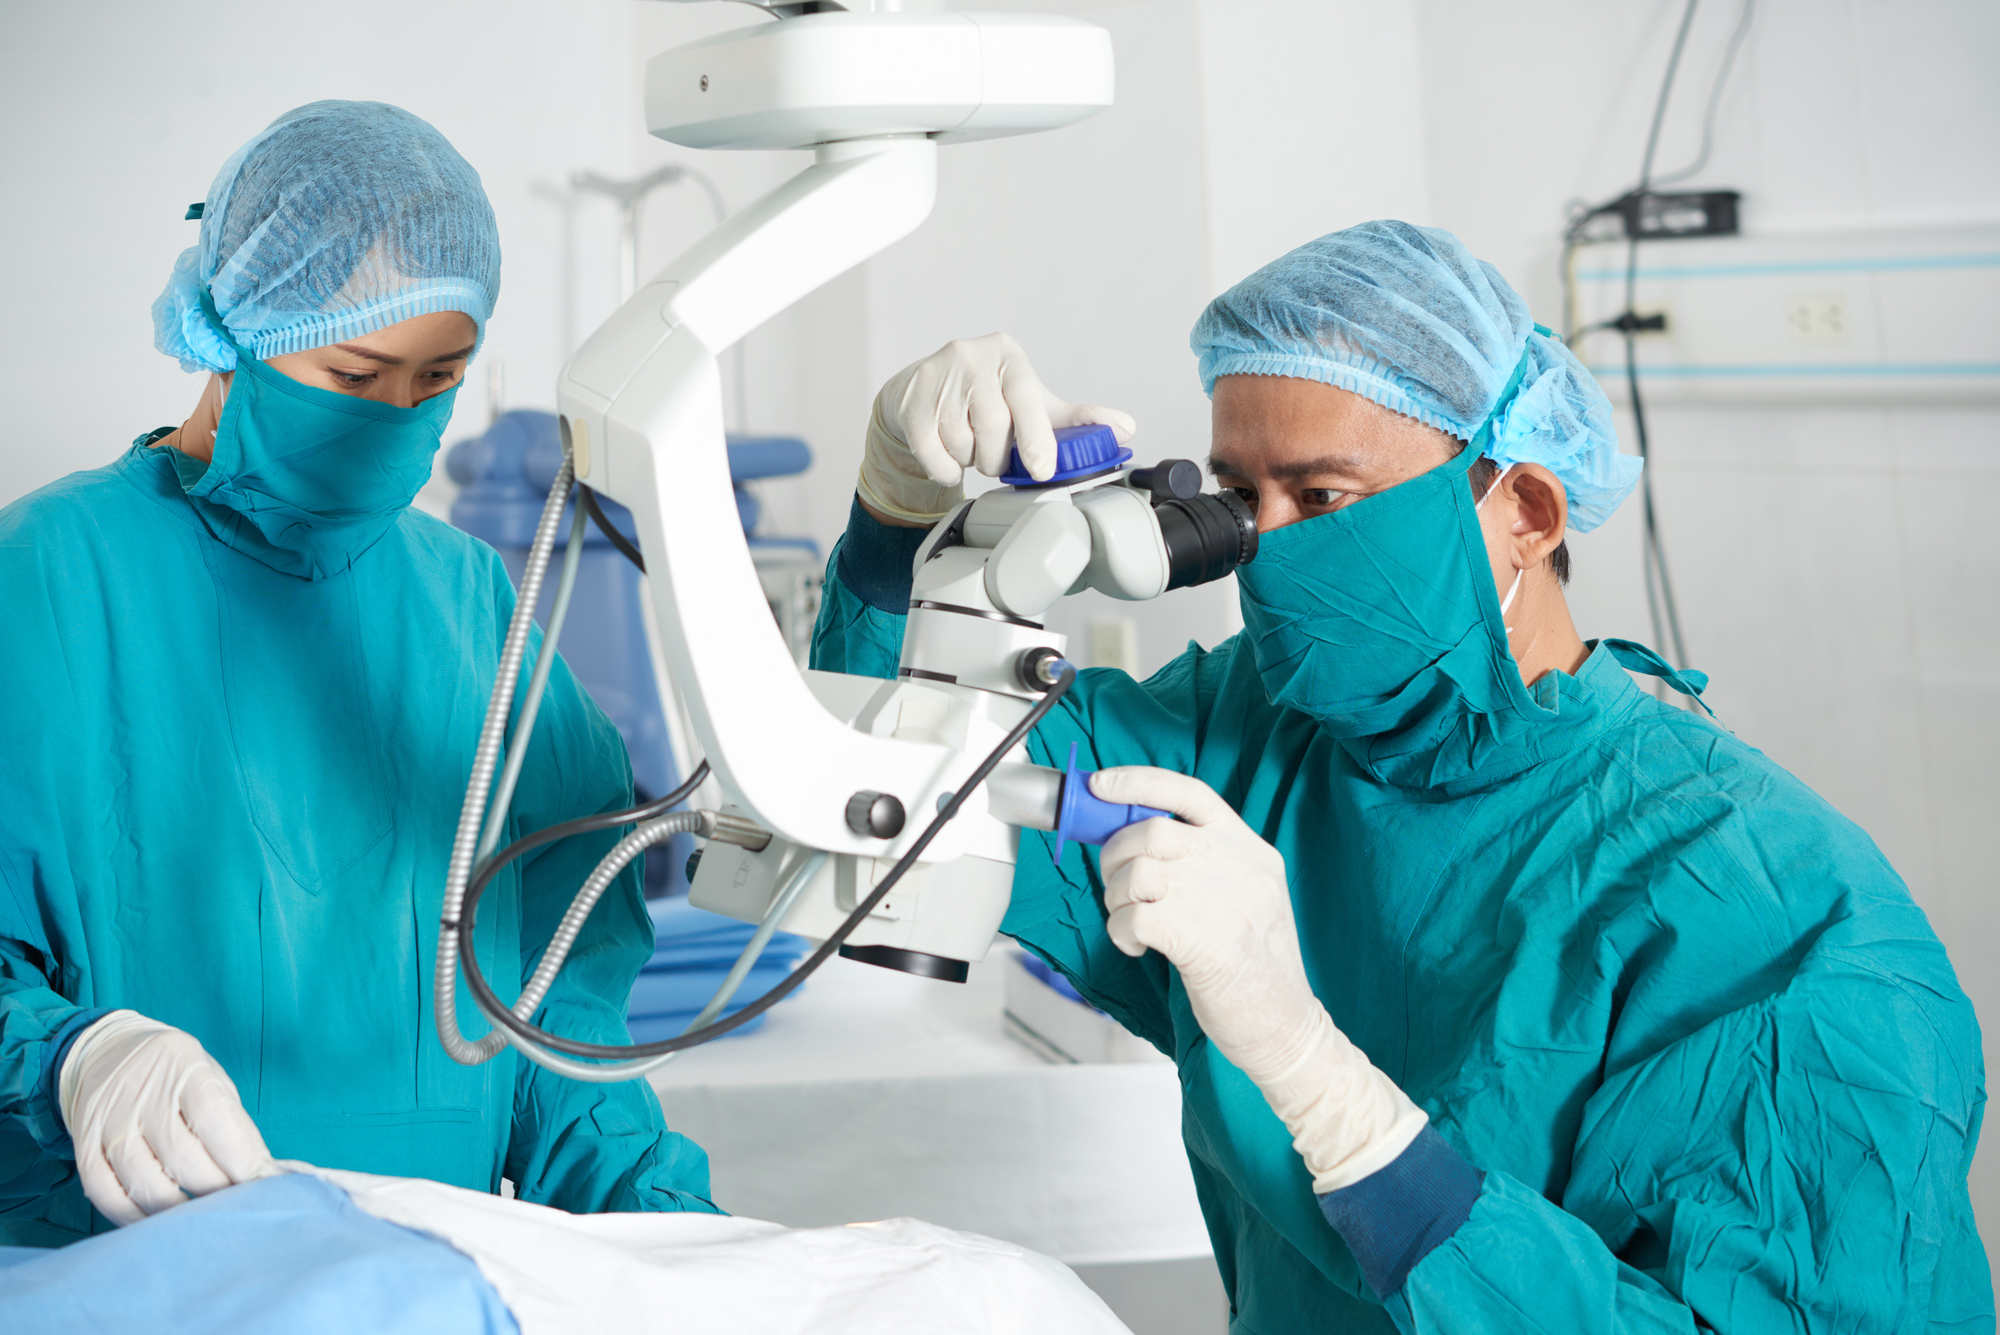 How many hours is glaucoma surgery?